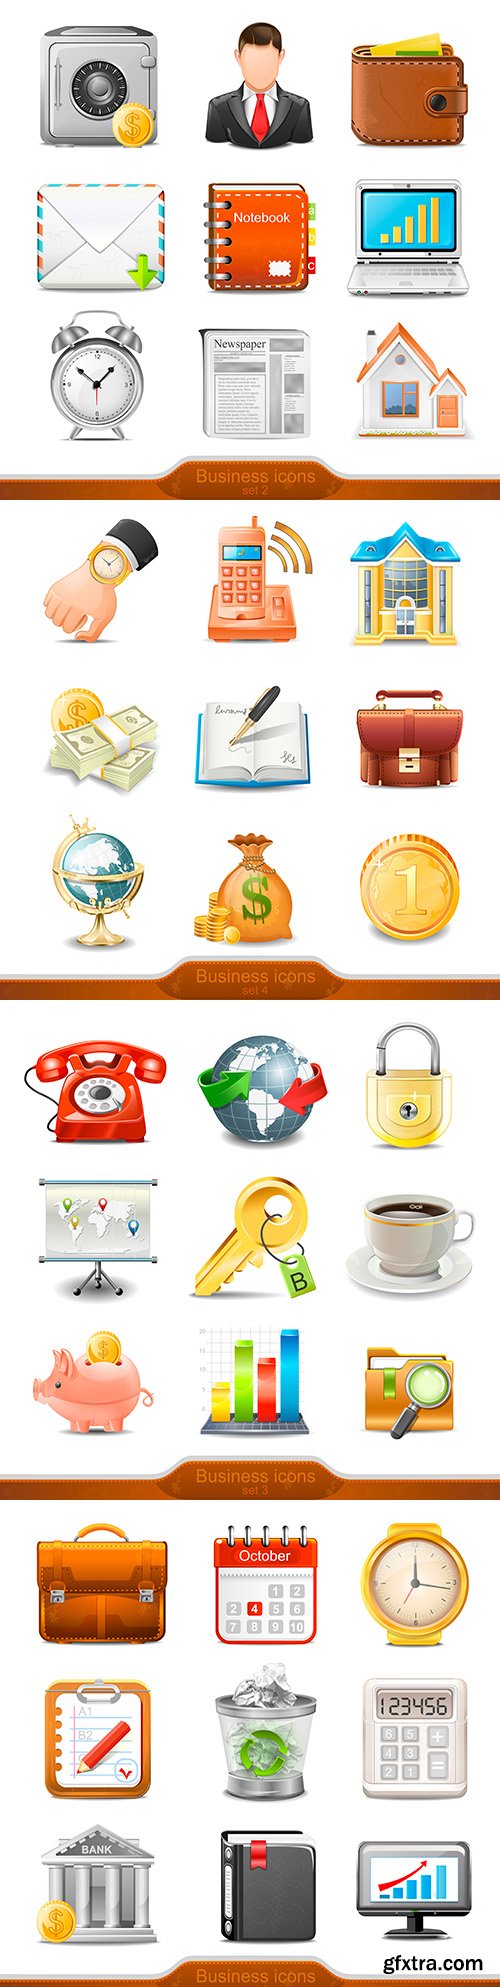 Business and men 's accessories for business set of icons
